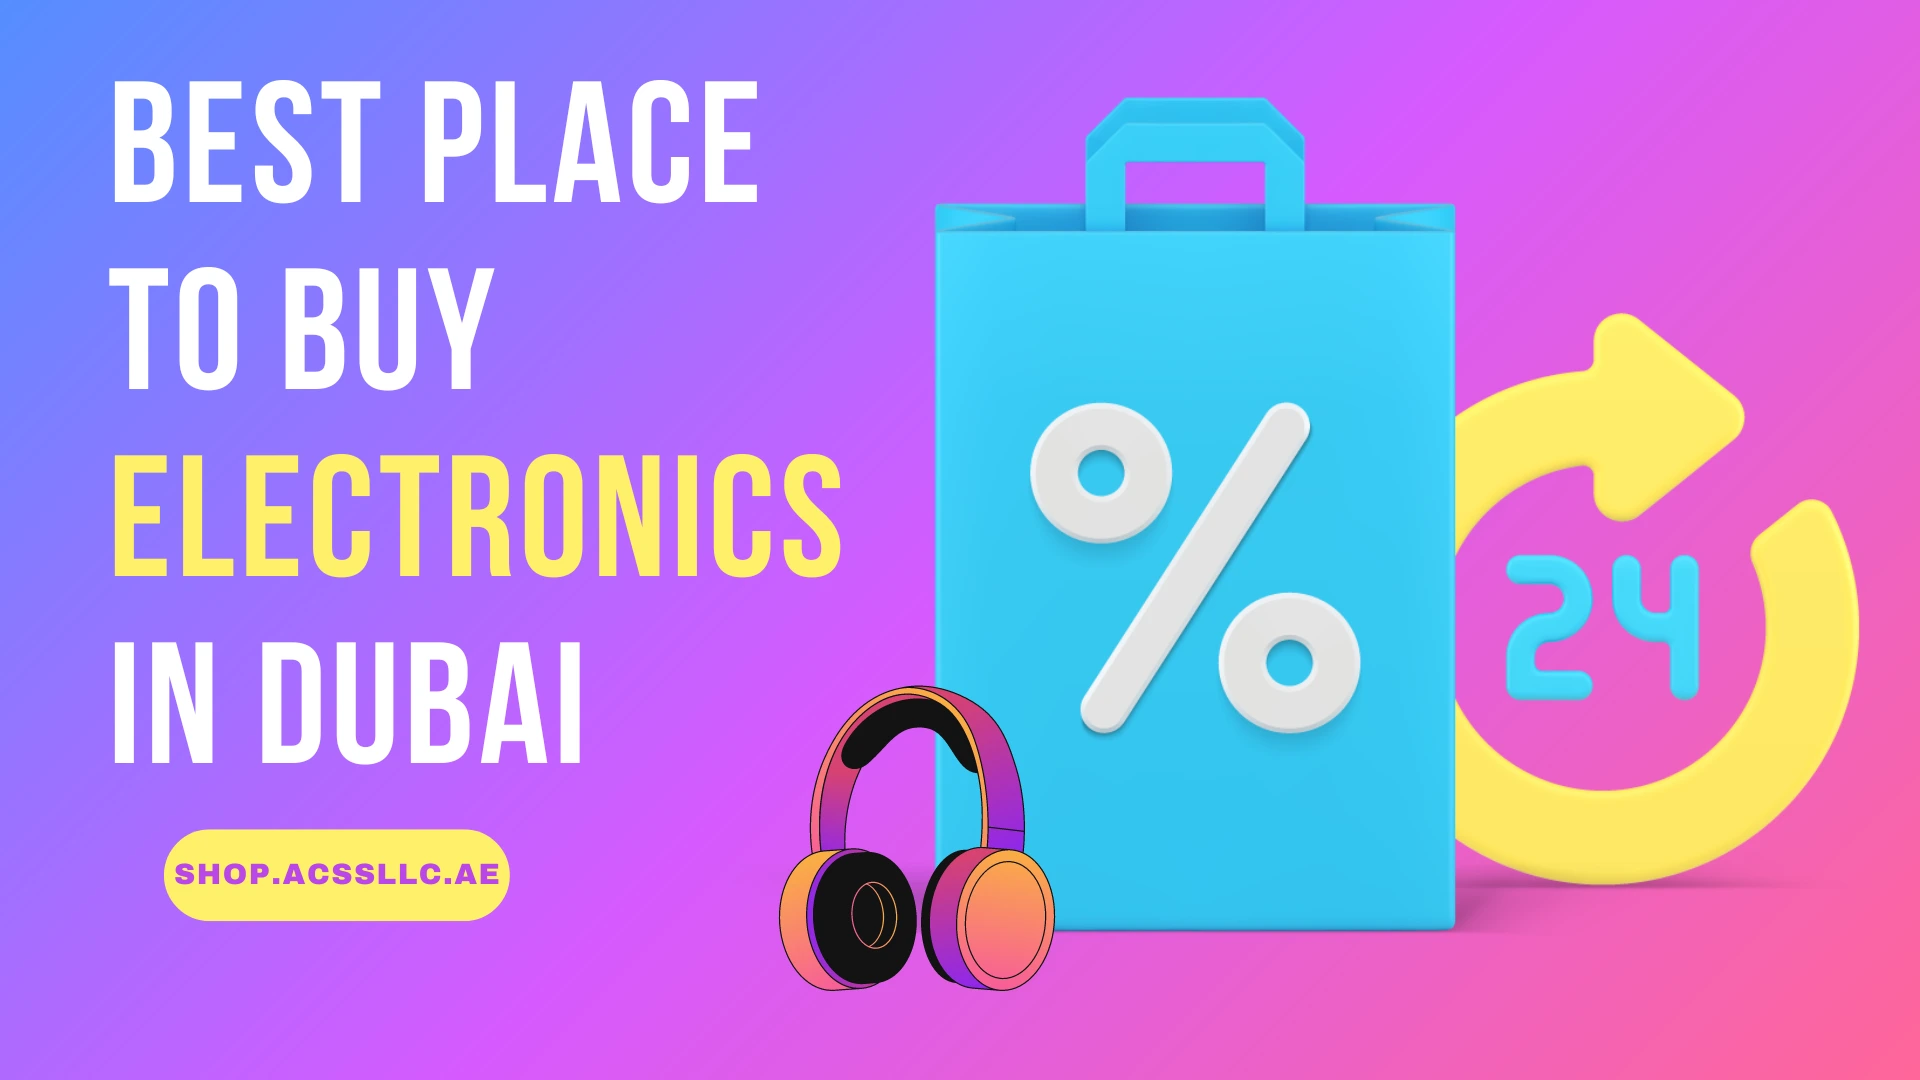 Best place to buy electronics in Dubai